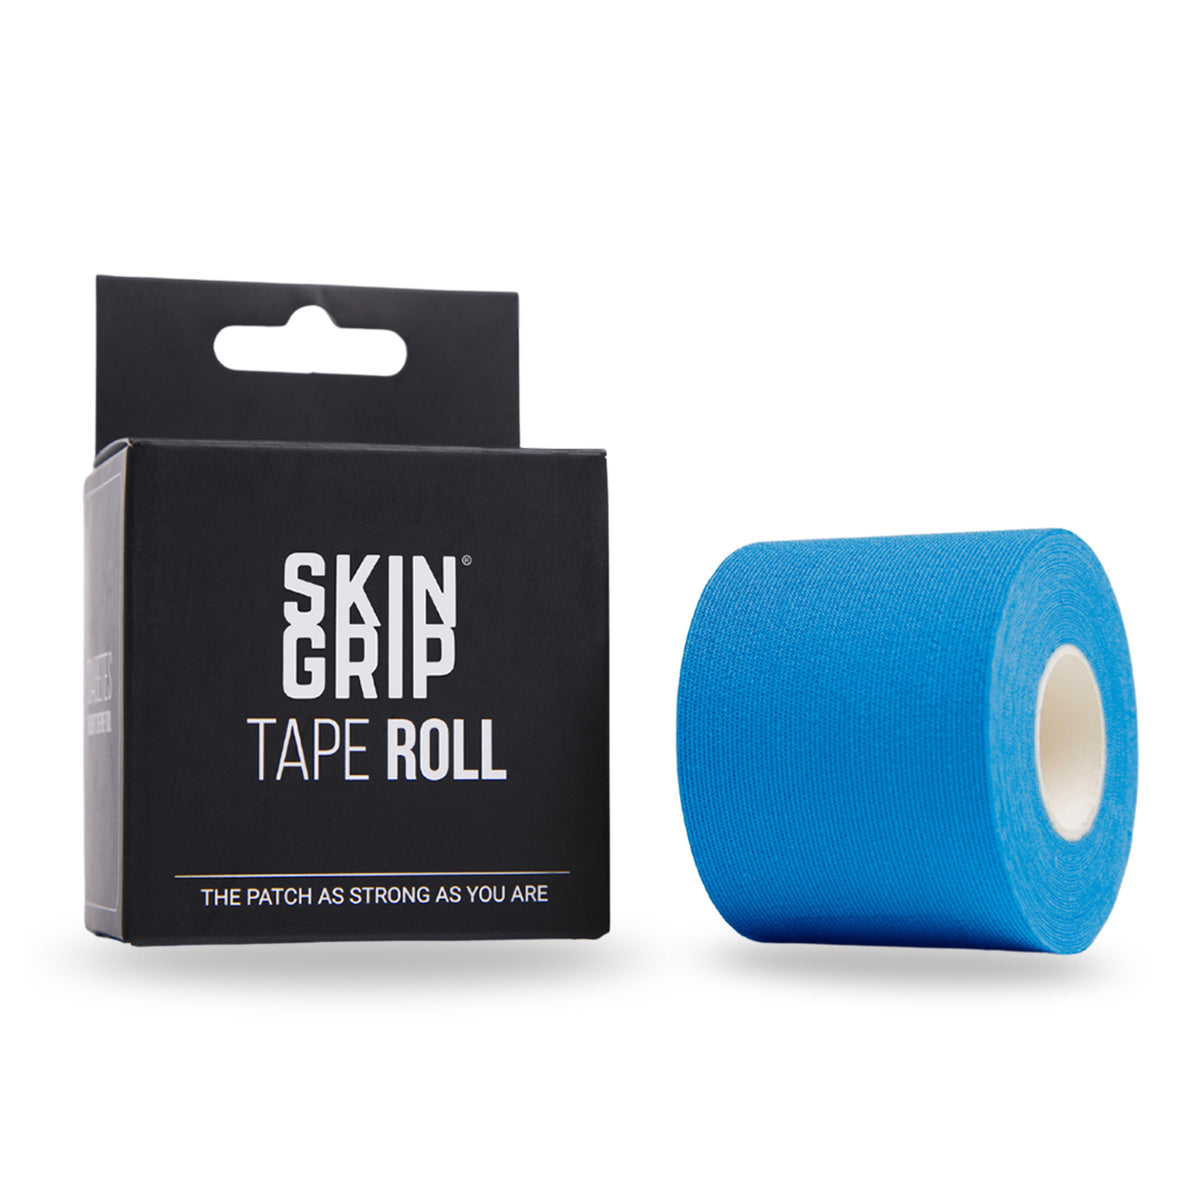 Transform Your Look with Support Body Tape Rolls 😍 